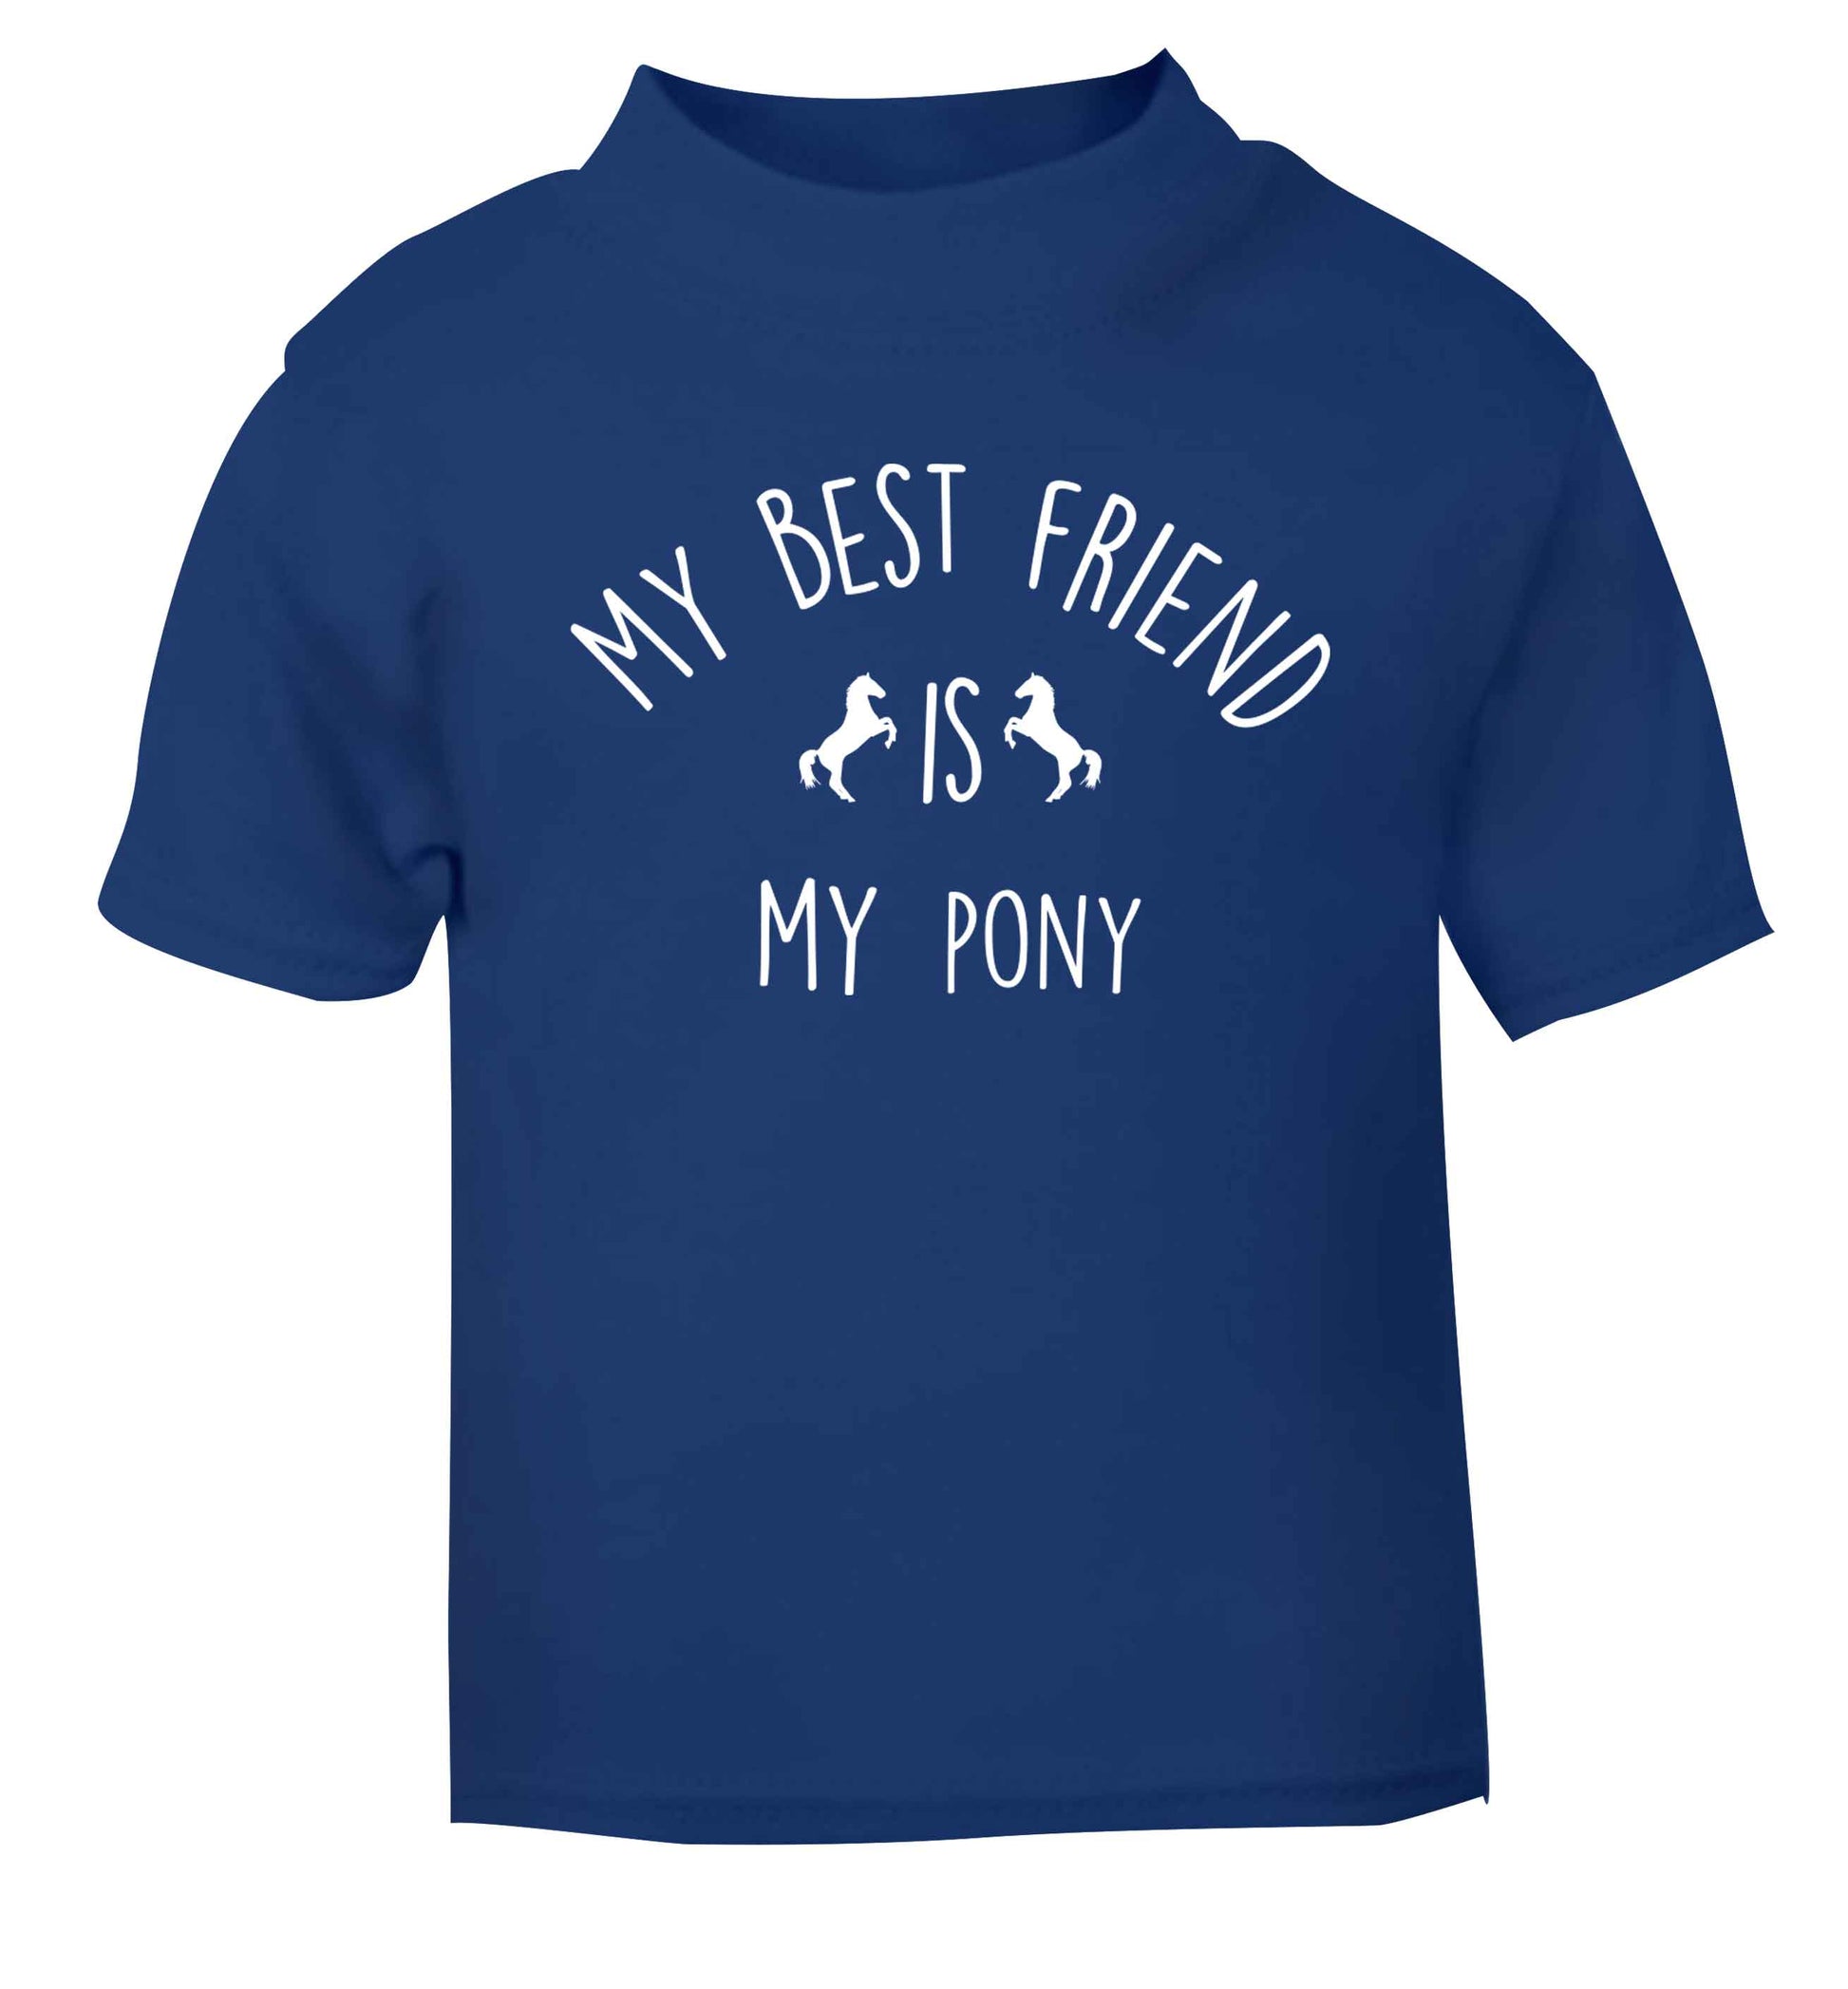 My best friend is my pony blue baby toddler Tshirt 2 Years